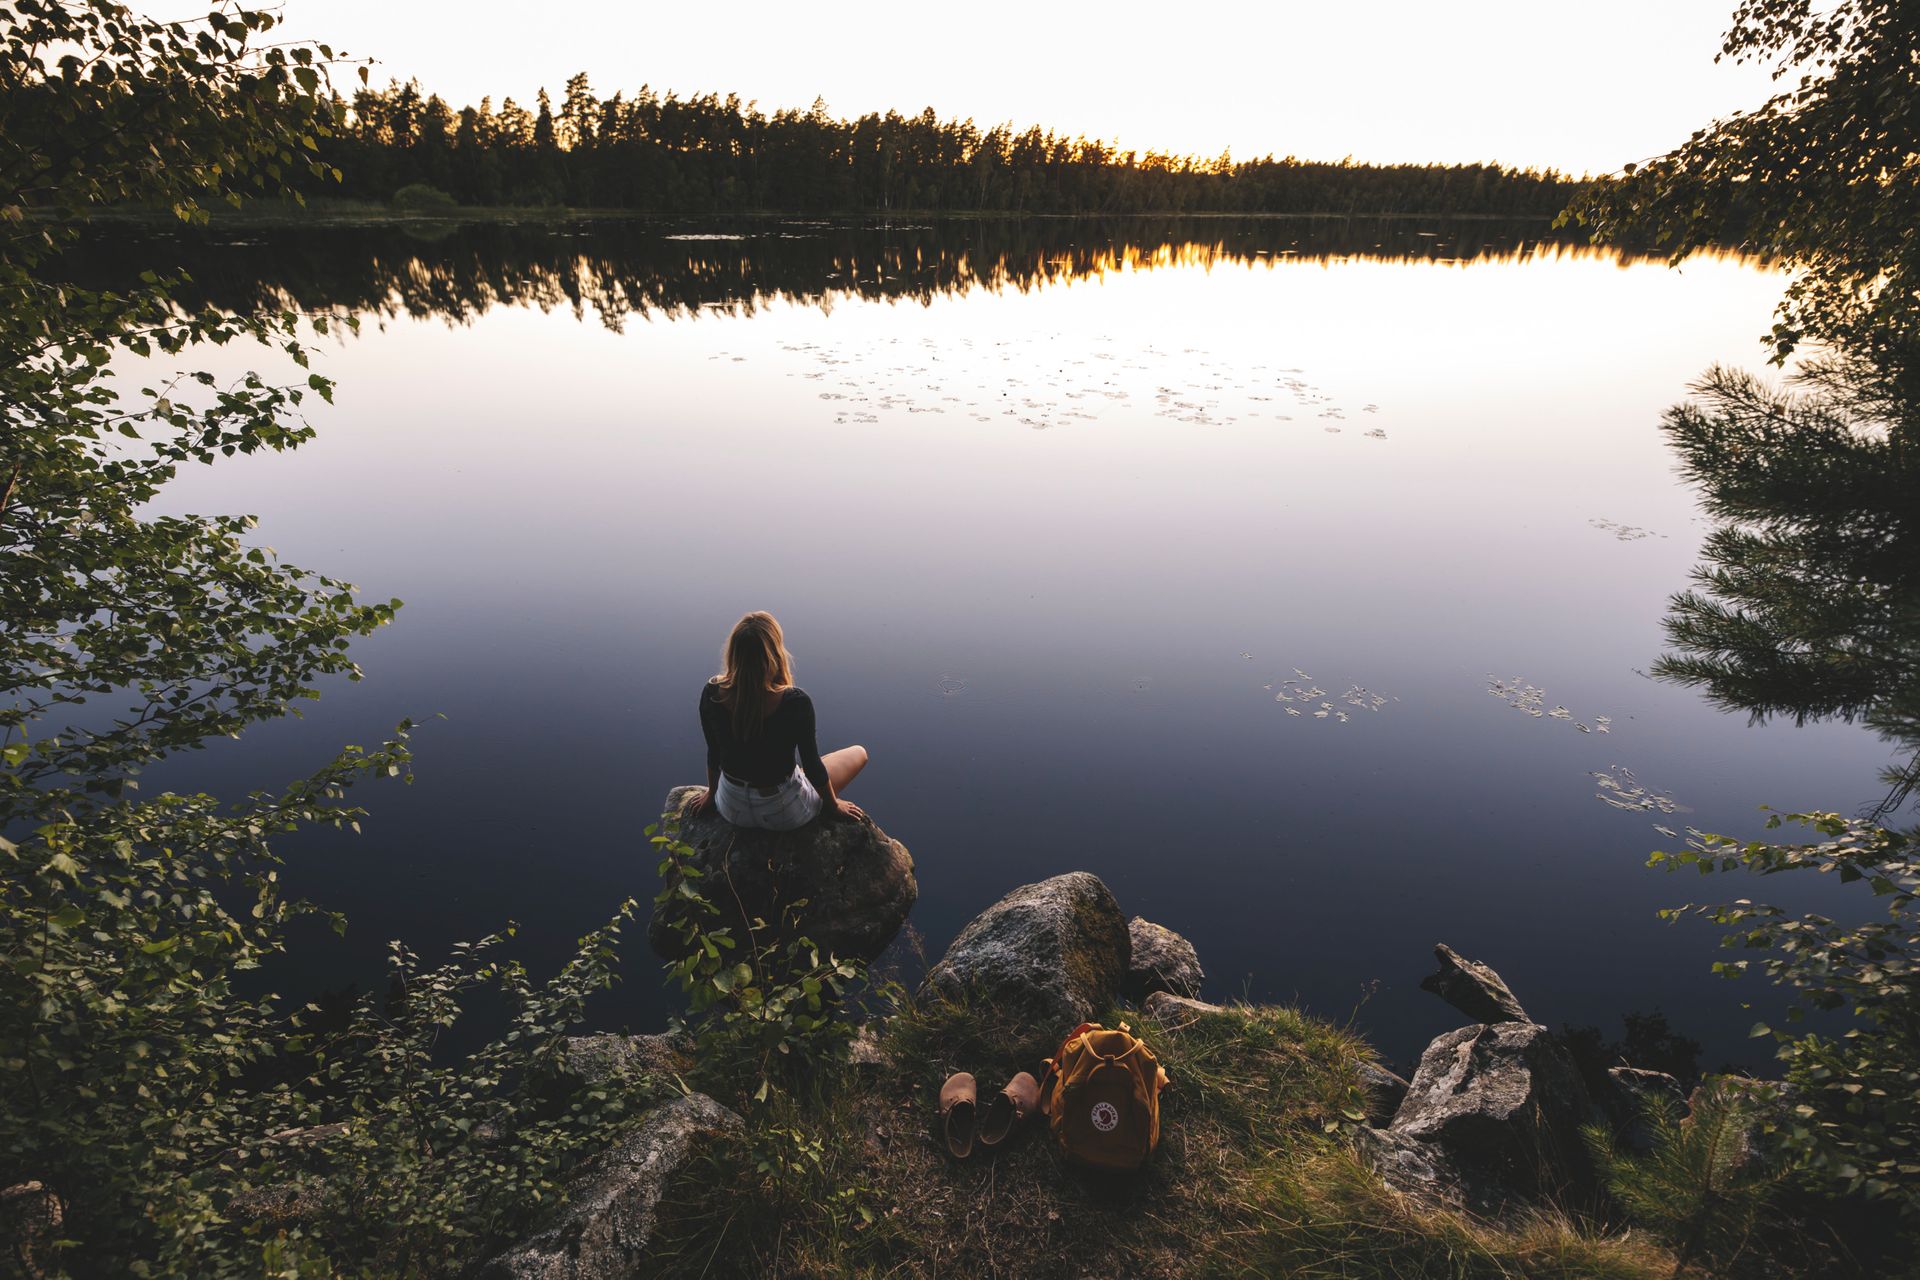 A woman sitting on a small rock looking out over a calm lake, the surrounding forest is mirrored in the lake.